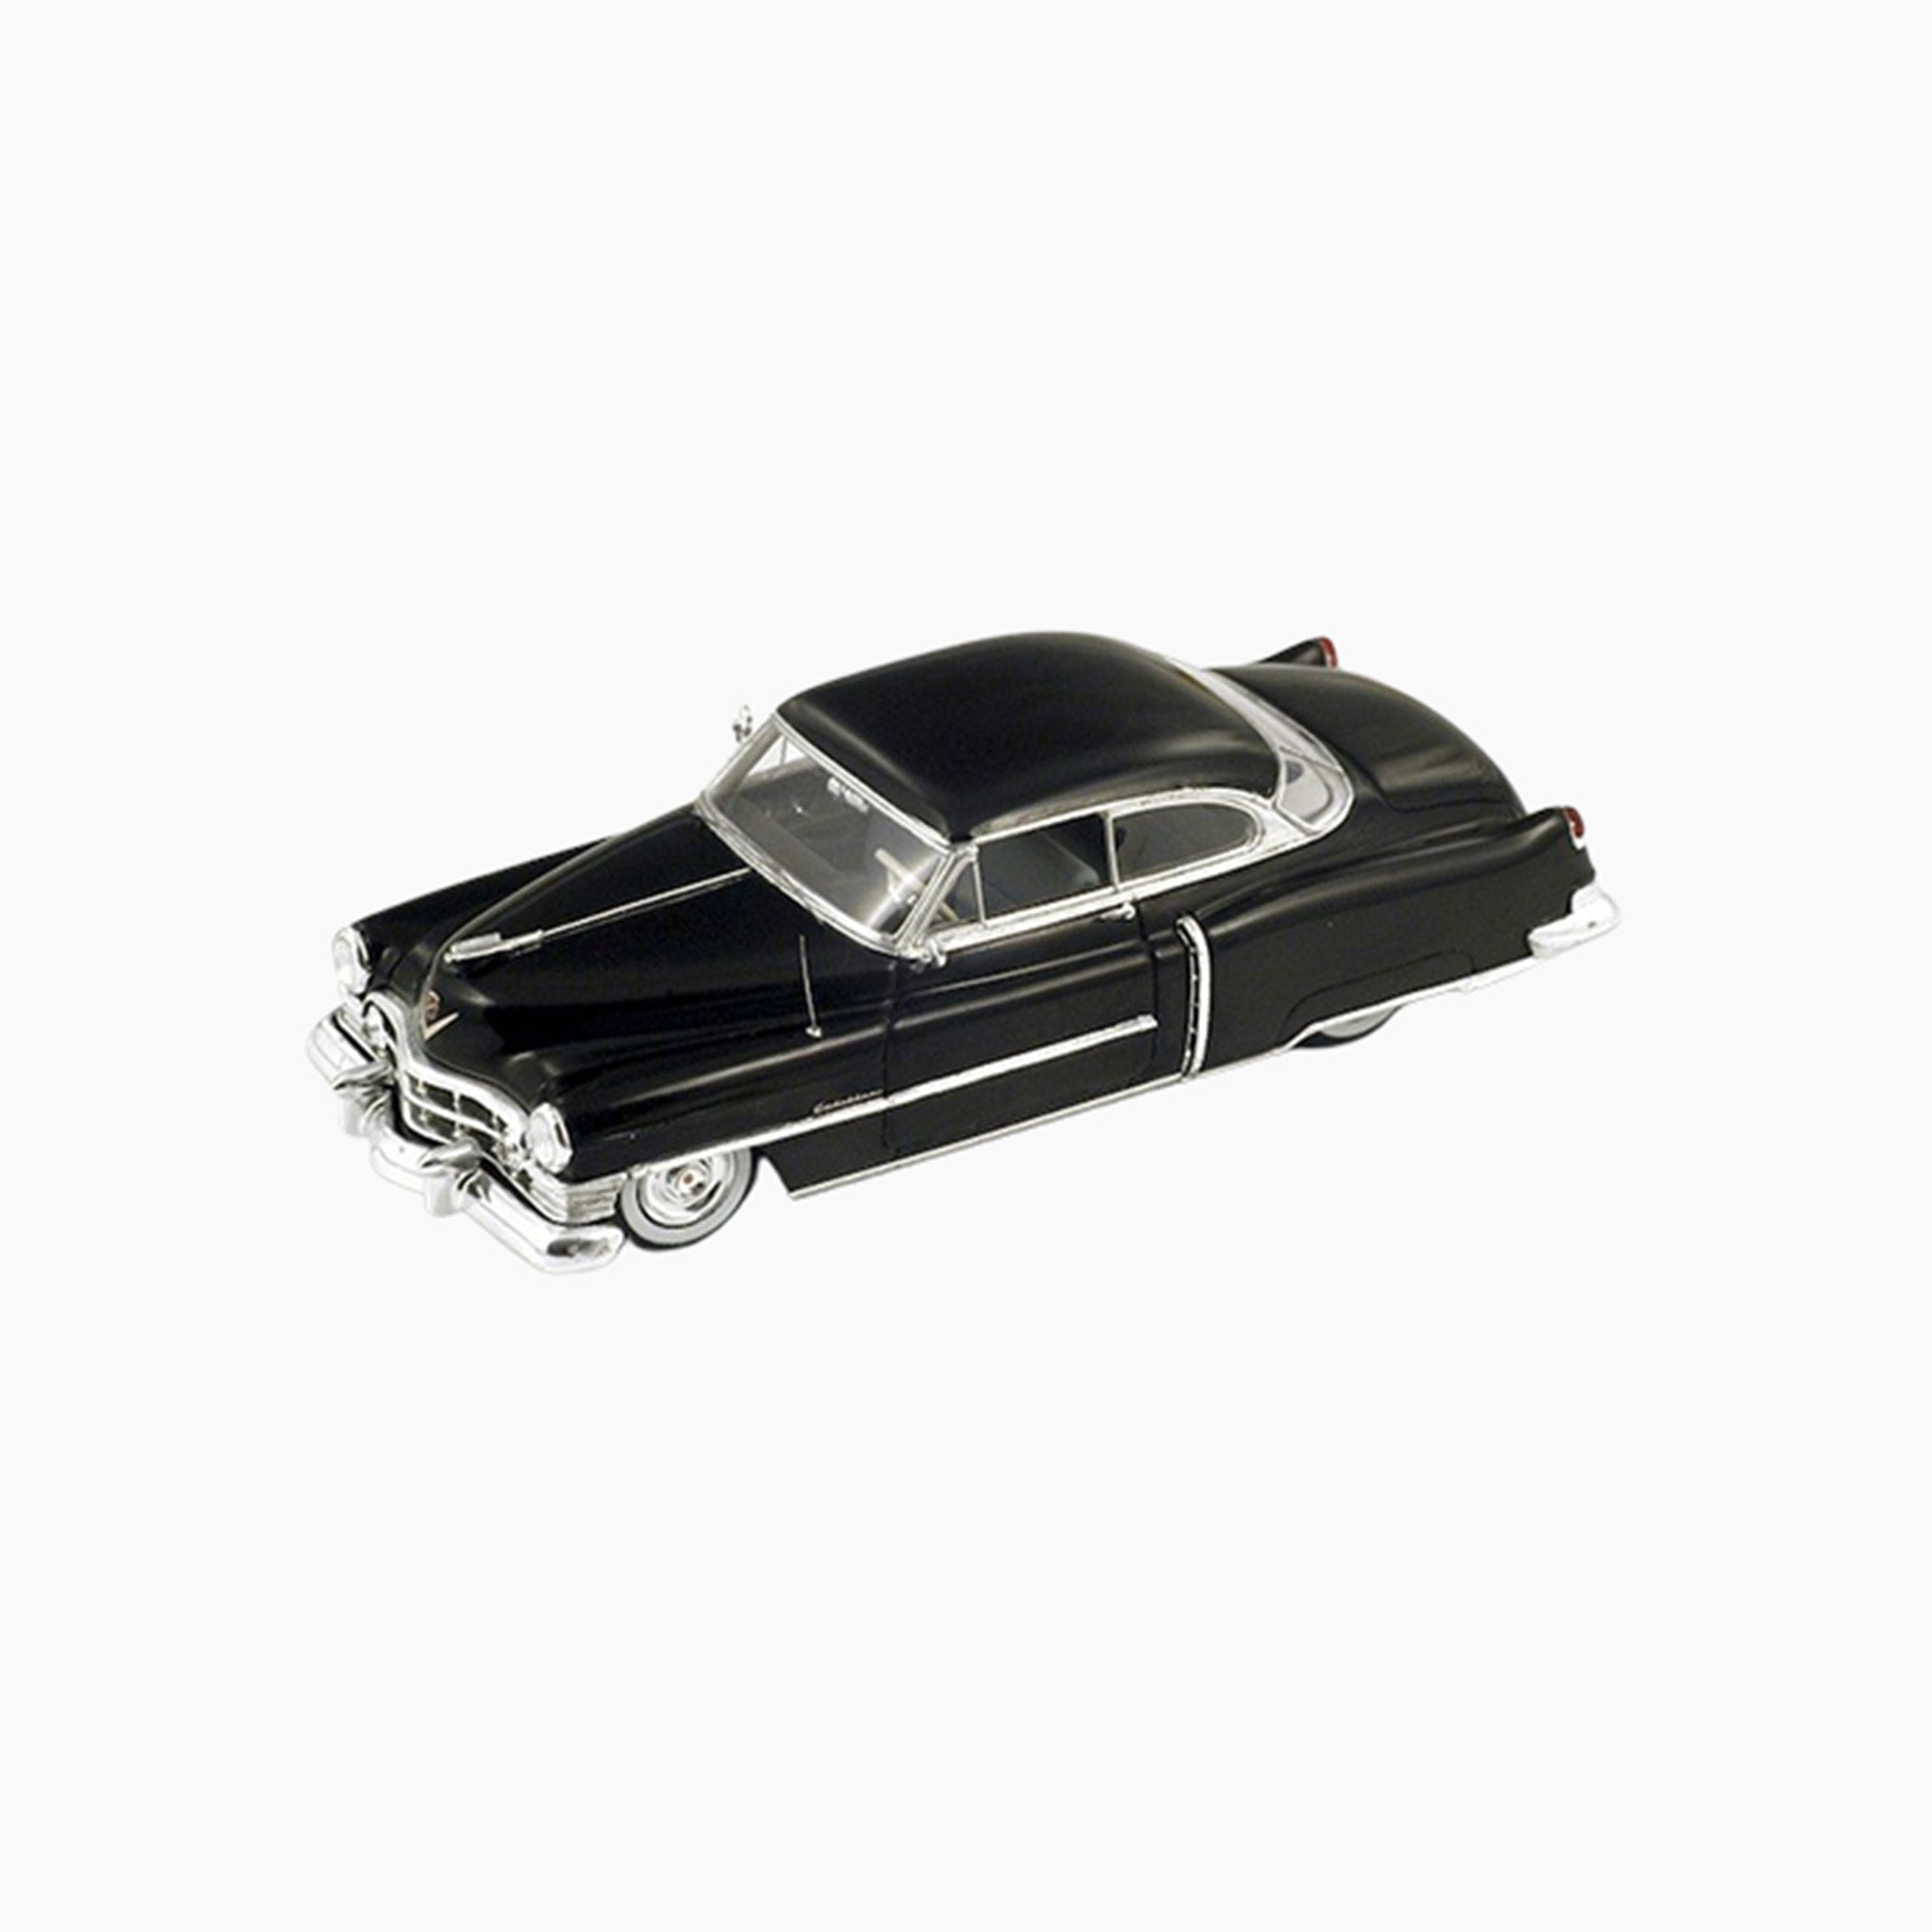 Cadillac Type 61 Coupe 1950 | 1:43 Scale Model-1:43 Scale Model-Spark Models-gpx-store